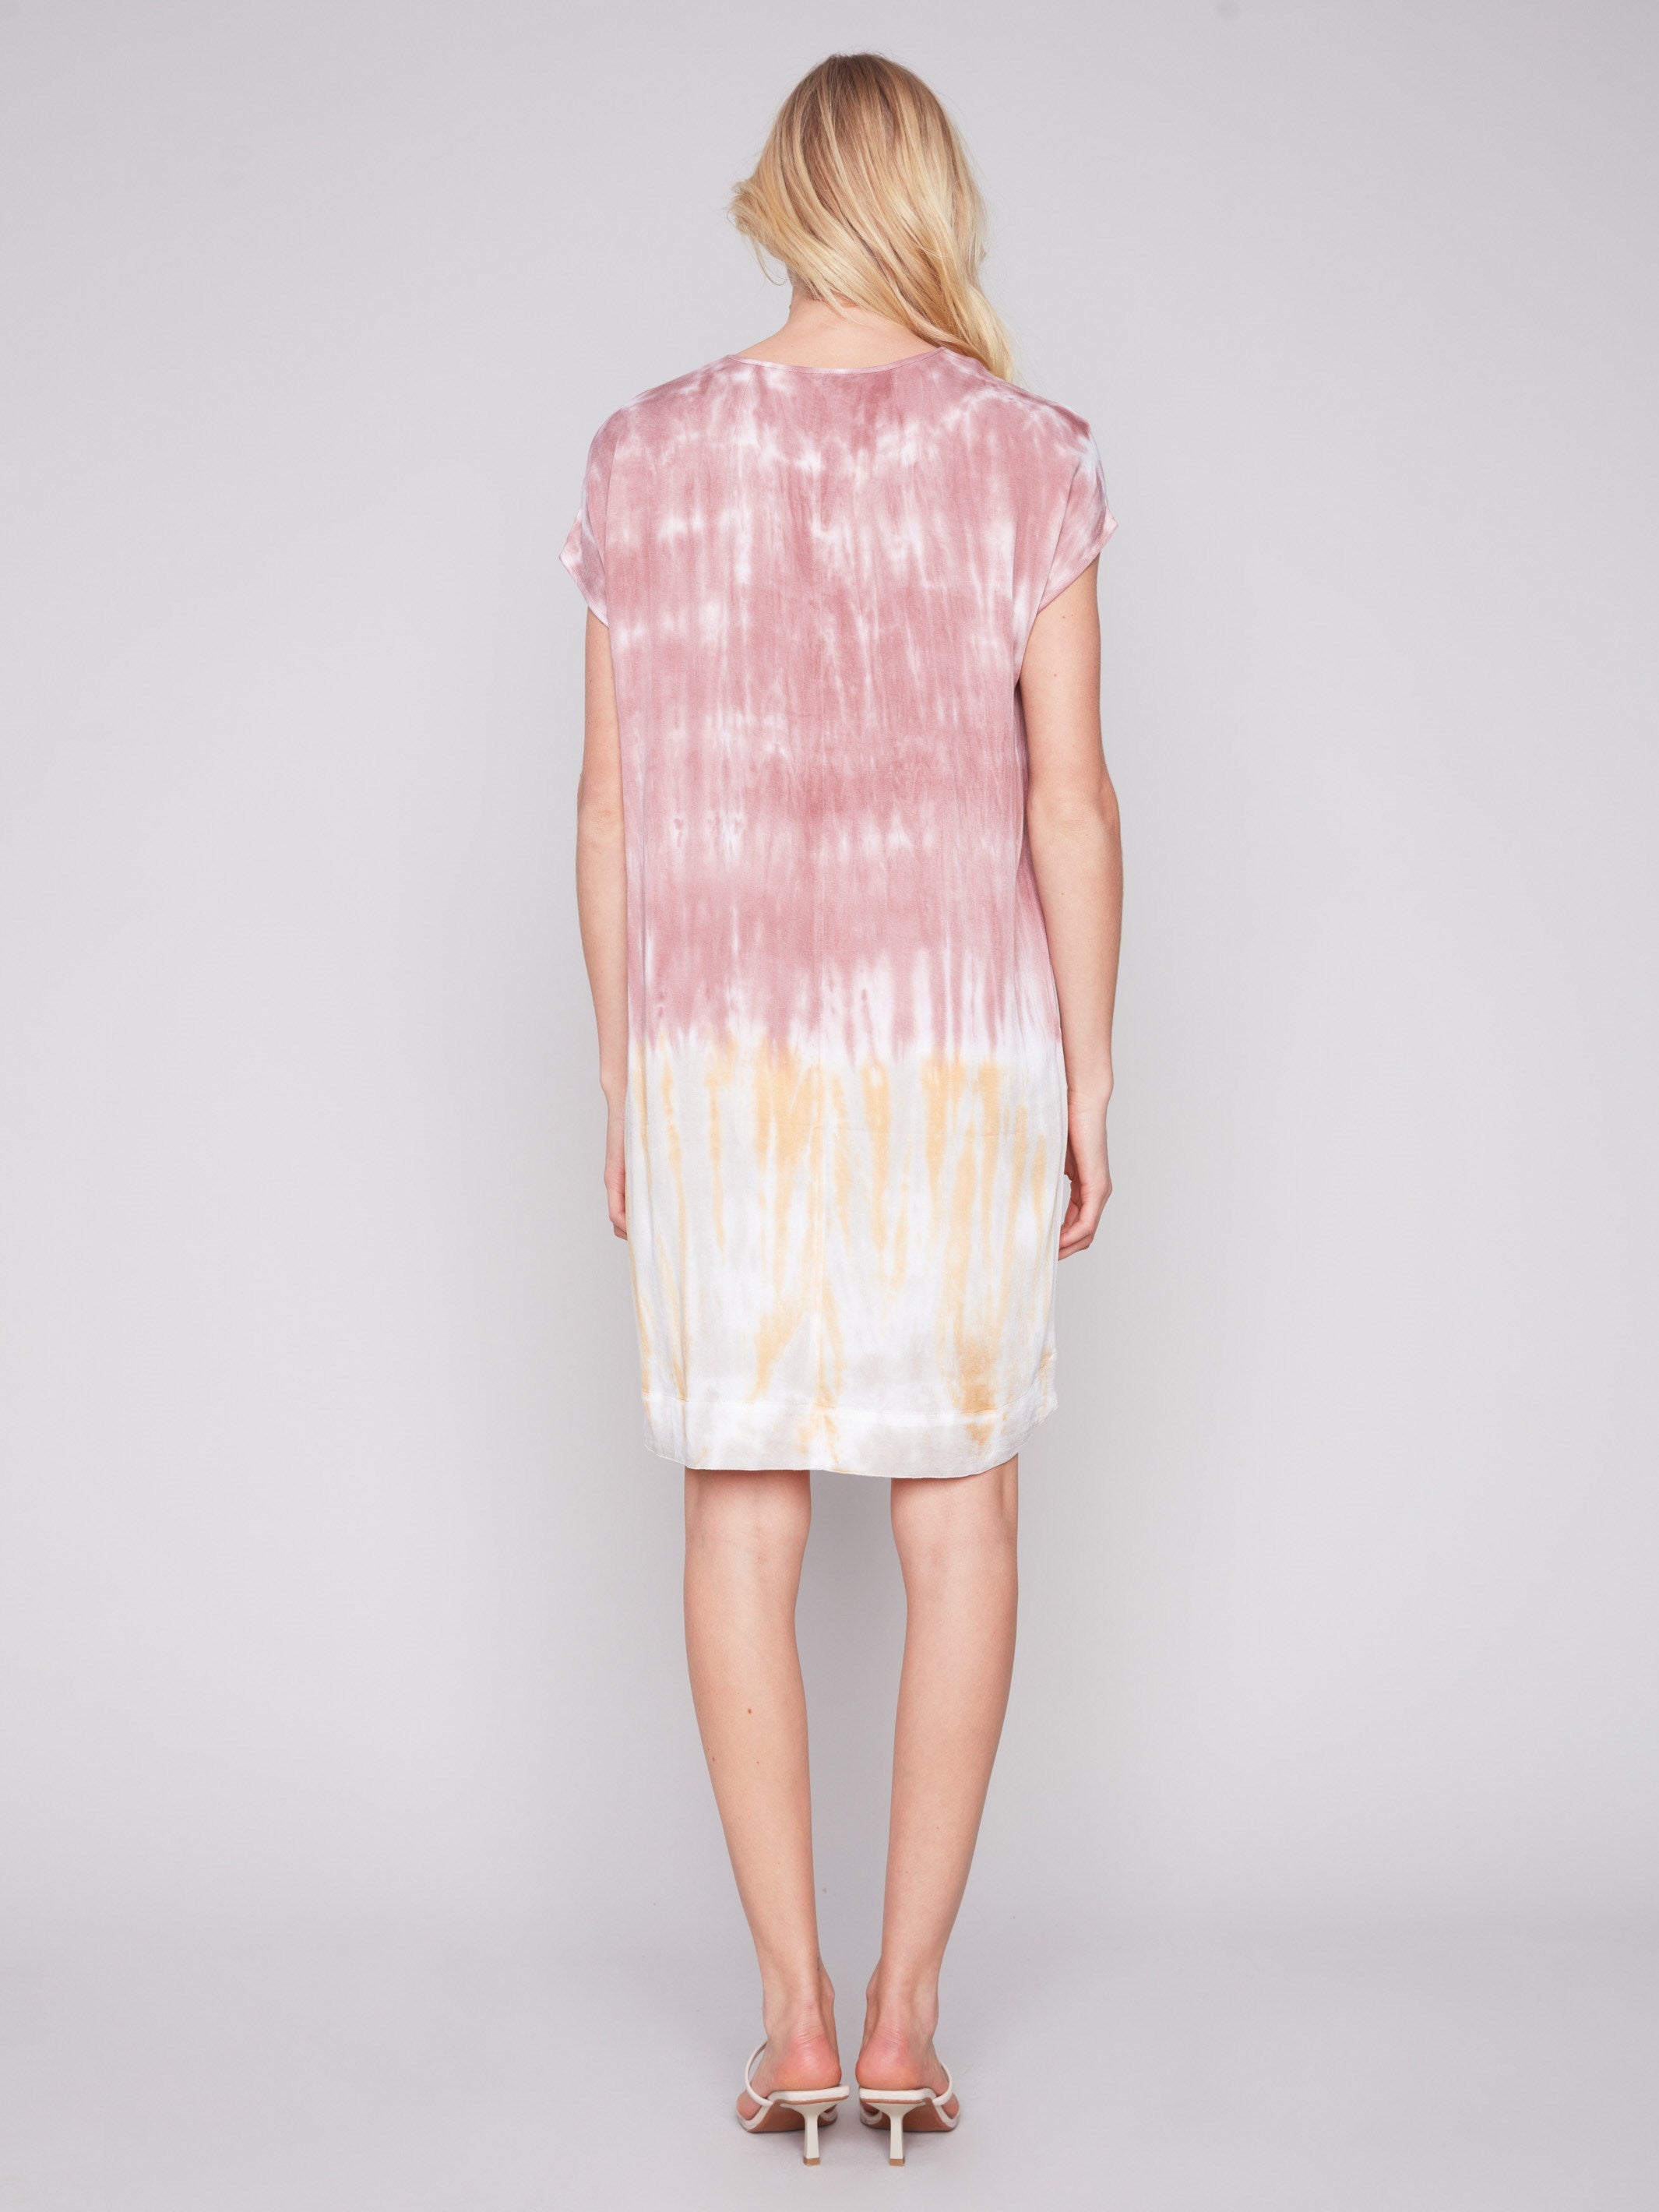 Tie-Dye Dress with Dolman Sleeves - Woodrose - Charlie B Collection Canada - Image 4